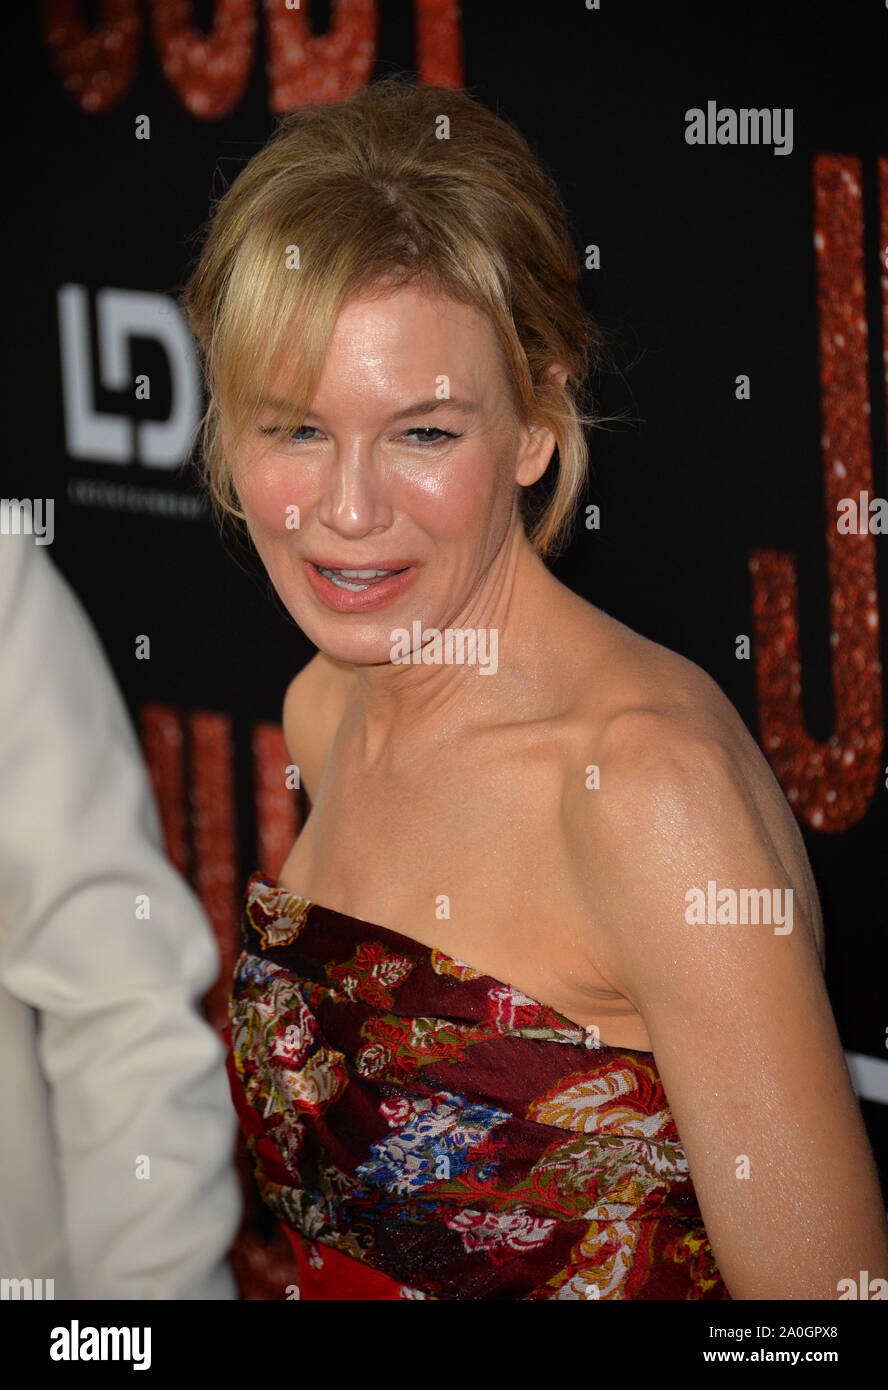 Los Angeles, USA. 20th Sep, 2019. LOS ANGELES, USA. September 20, 2019: Renee Zellweger at the premiere of 'Judy' at the Samuel Goldwyn Theatre. Picture Credit: Paul Smith/Alamy Live News Stock Photo